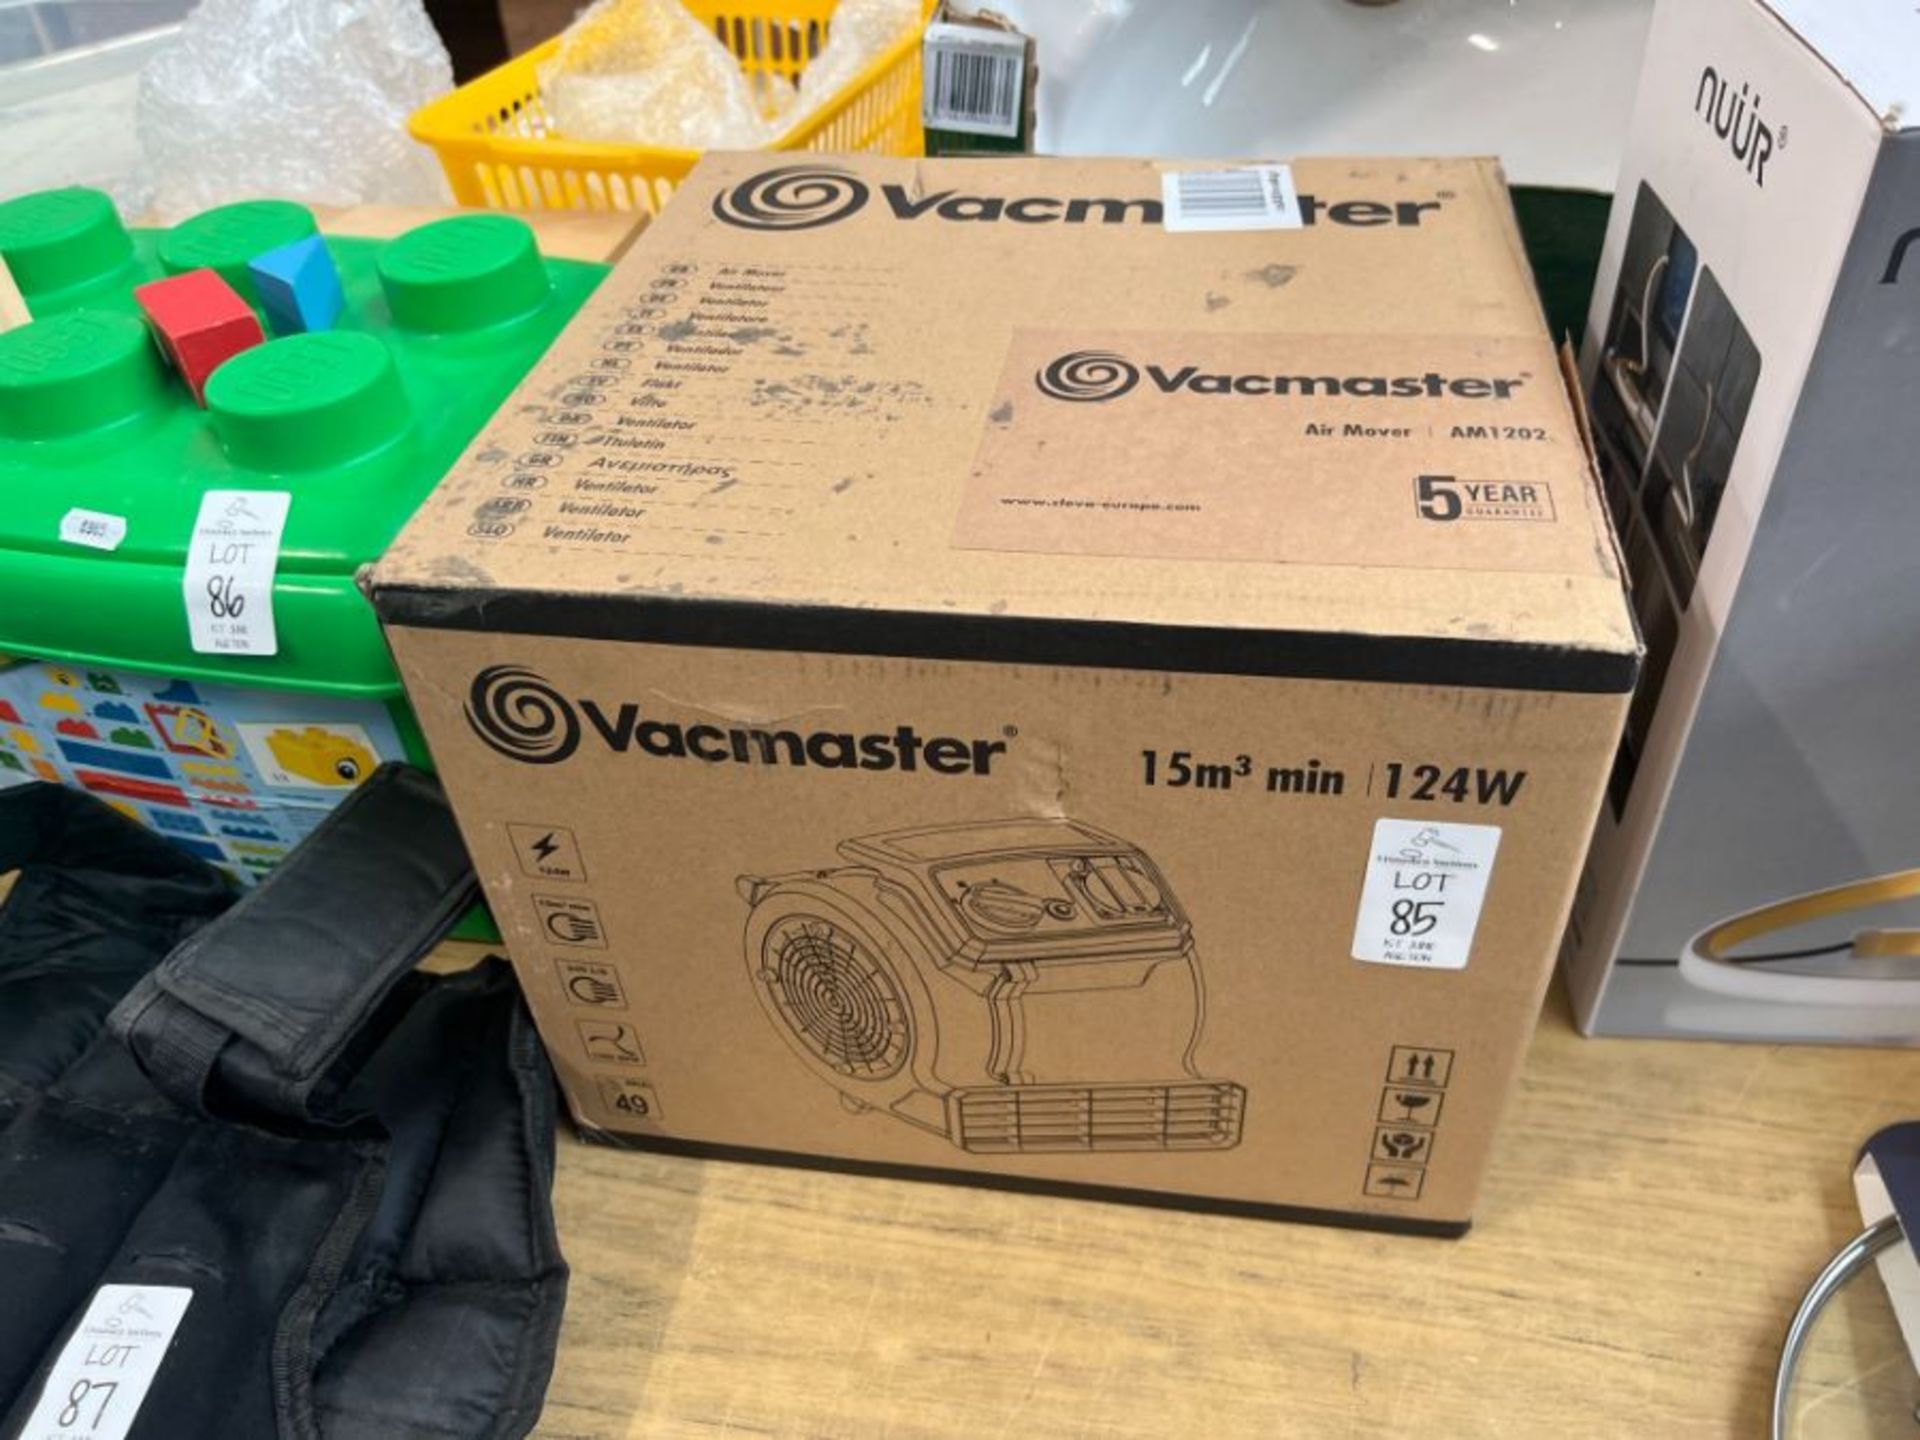 VACMASTER 124W AIR MOVER